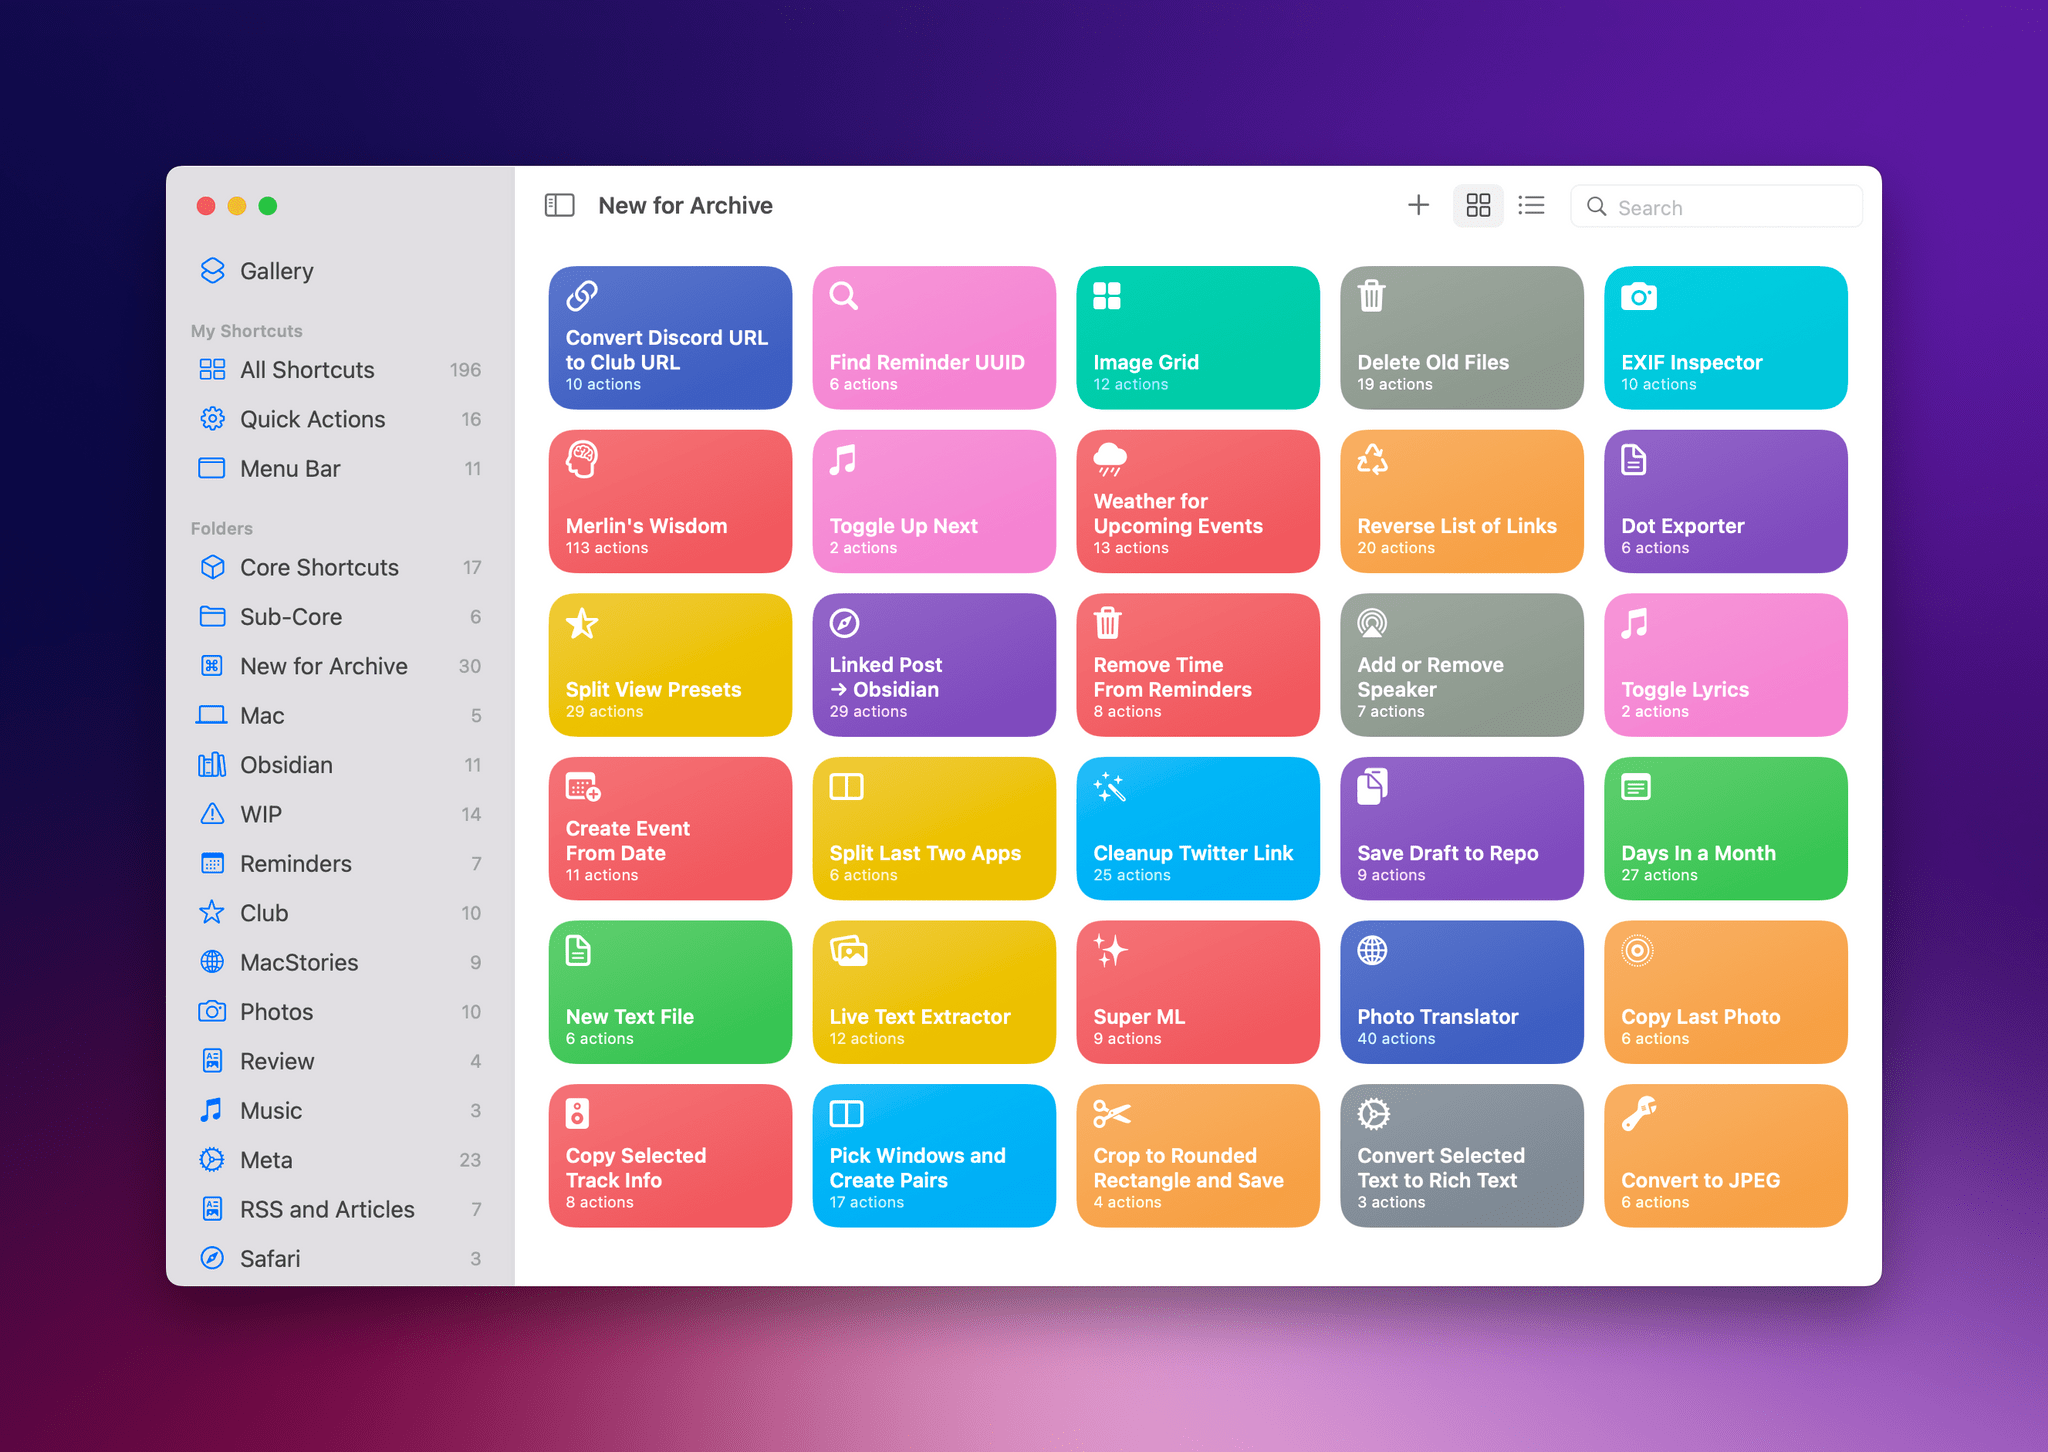 All the shortcuts I created for Automation April this month.